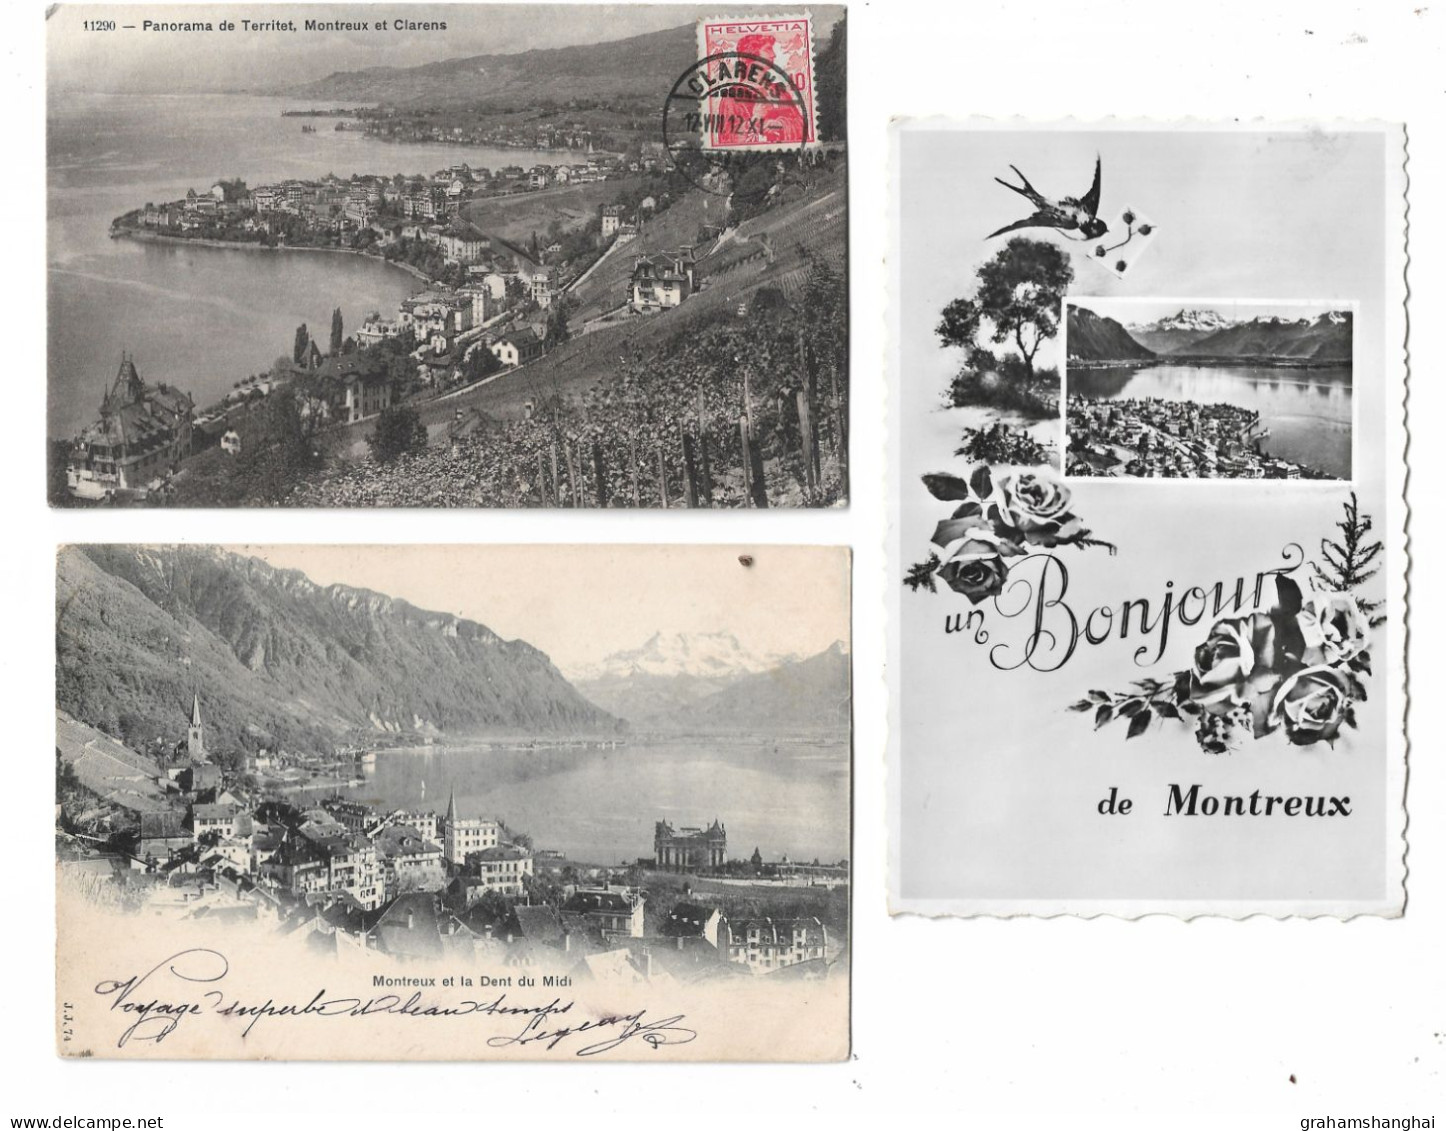 11 Postcards Lot Switzerland VD Vaud Montreux Assorted Views Some Undivided All Posted Early-mid 20th Century - Montreux